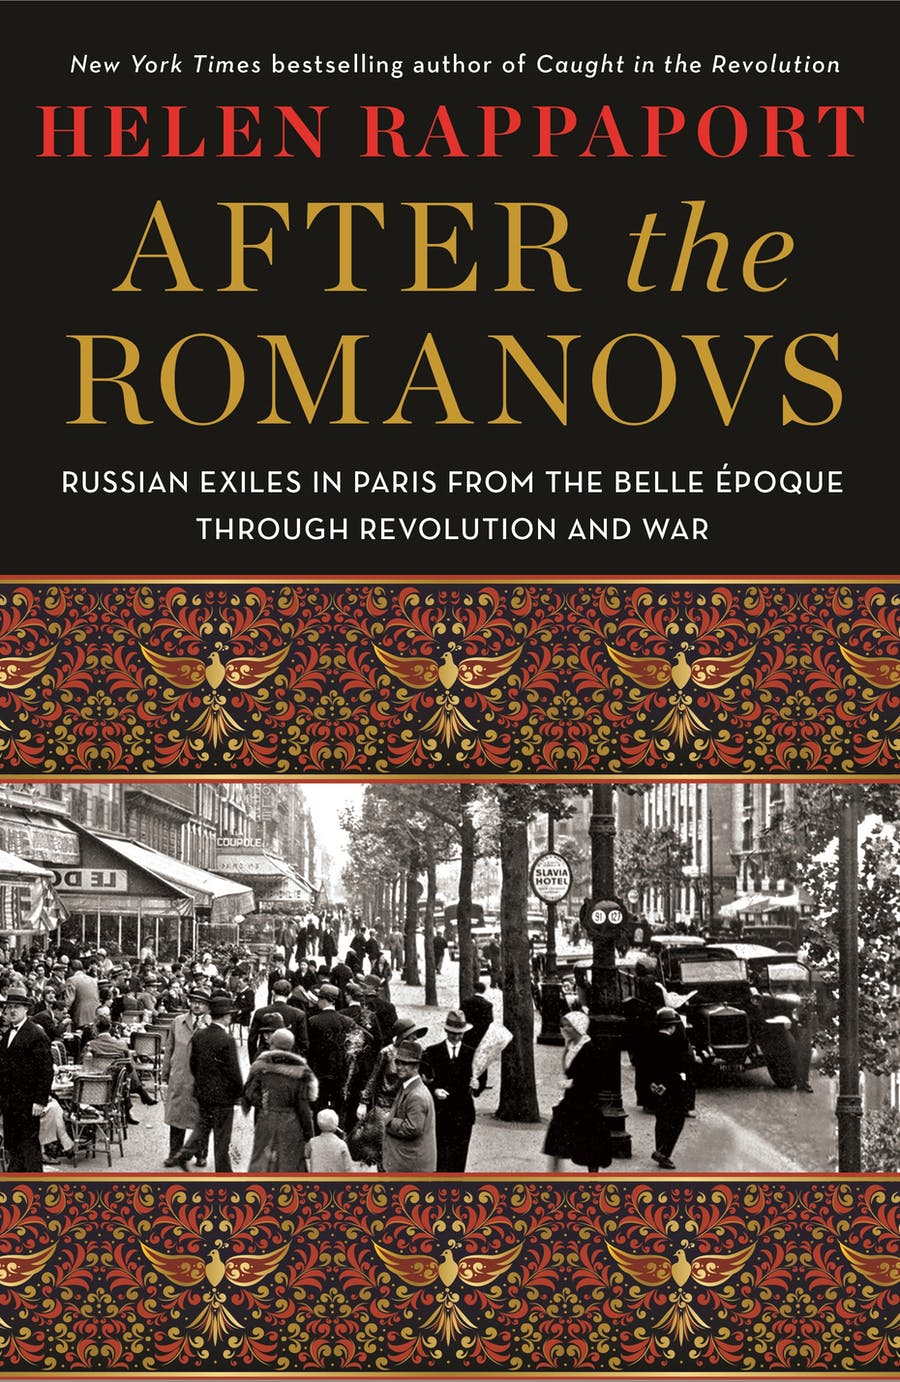 text on top half of cover and image of early 20th-century Paris bustling sidewalk